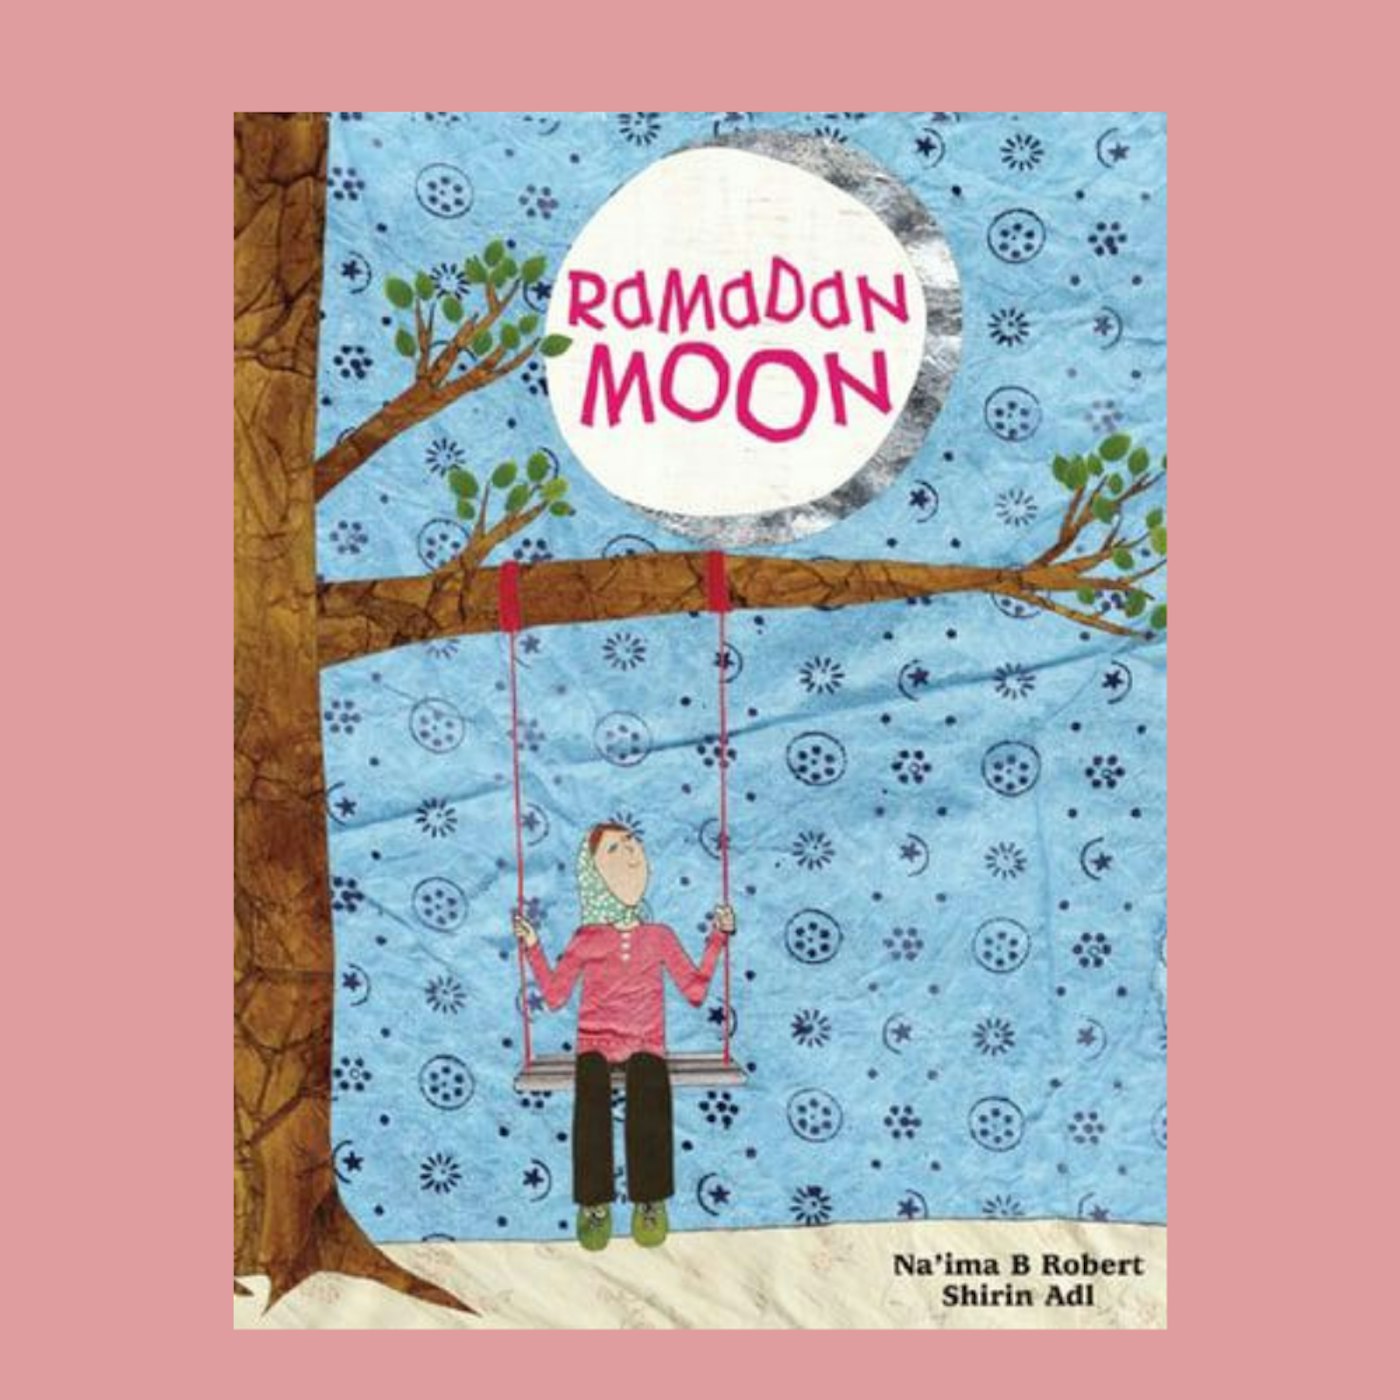 19 Islamic and Muslim Character Books for Kids About Ramadan, Eid and  Everyday Life! | Amaliah